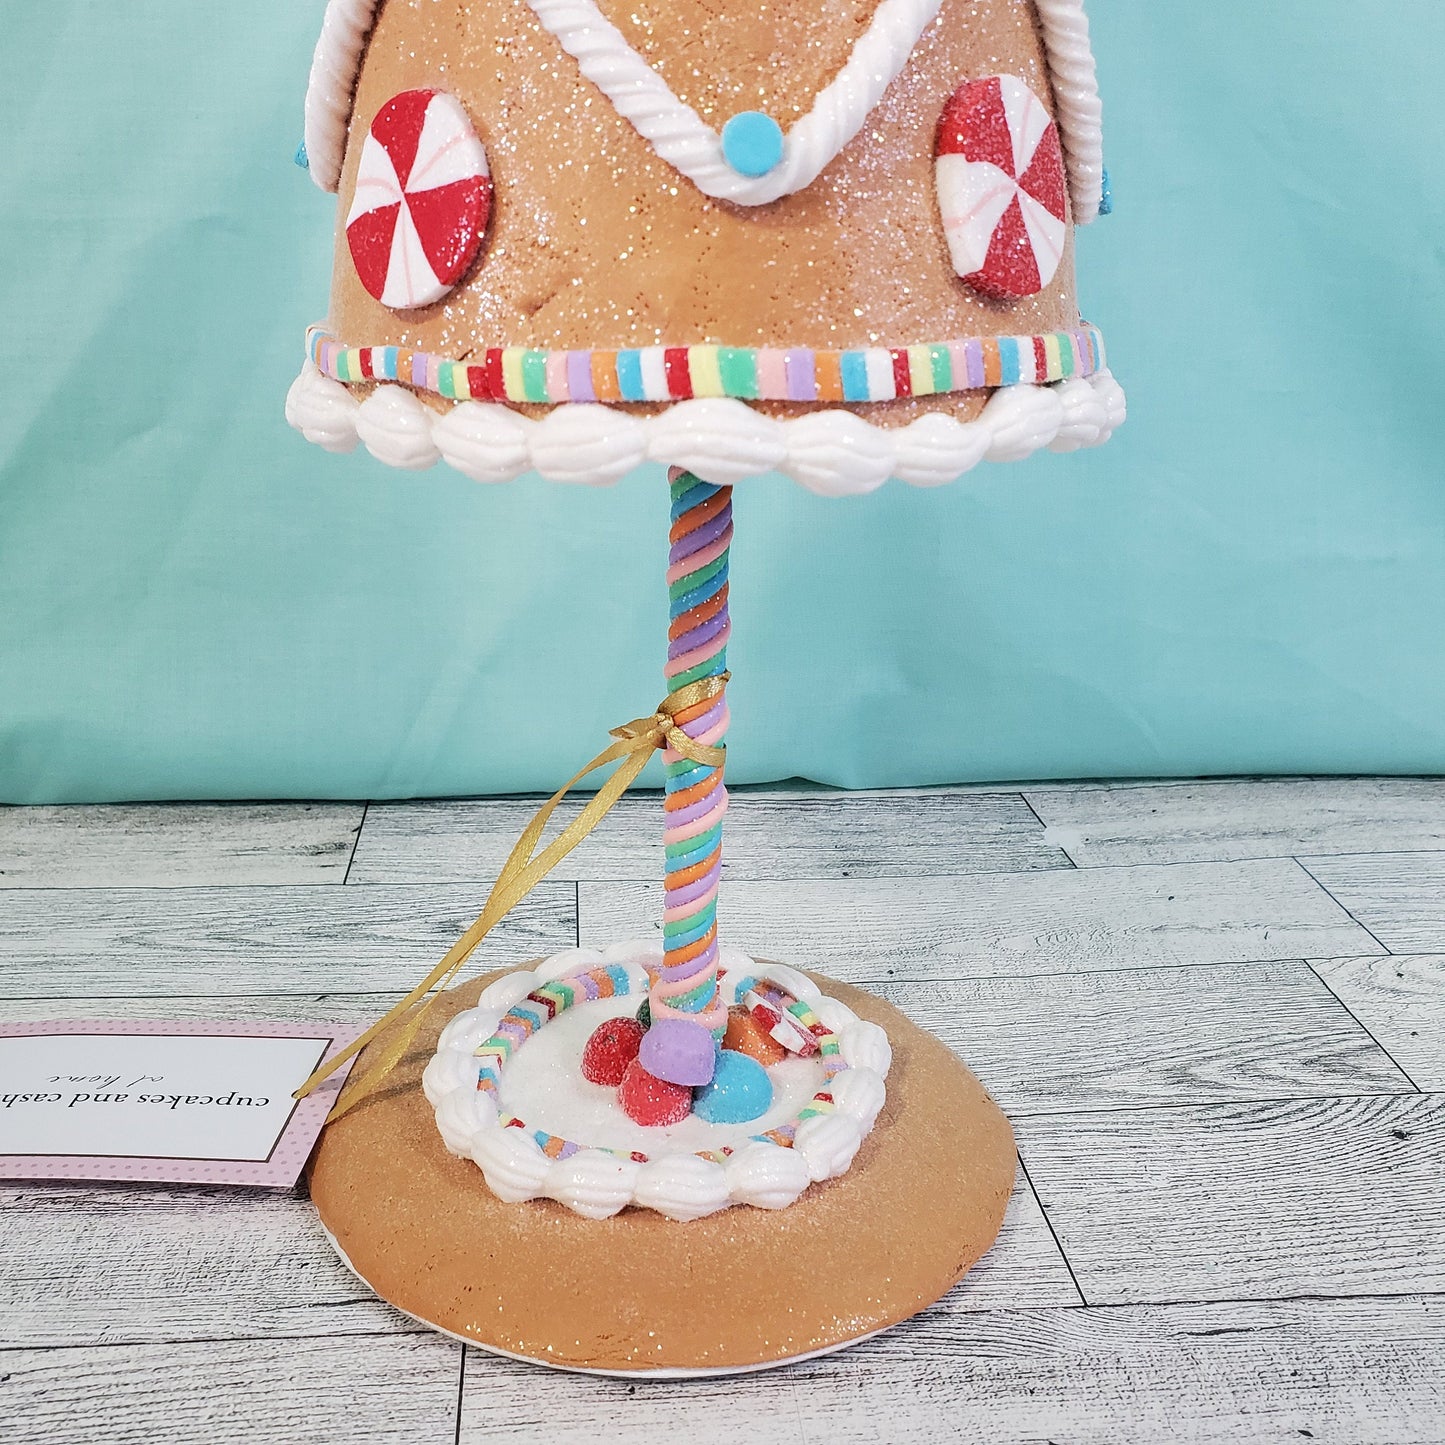 Cupcakes and Cashmere 27" Gingerbread Claydough Christmas Tree with Sweet Decorations